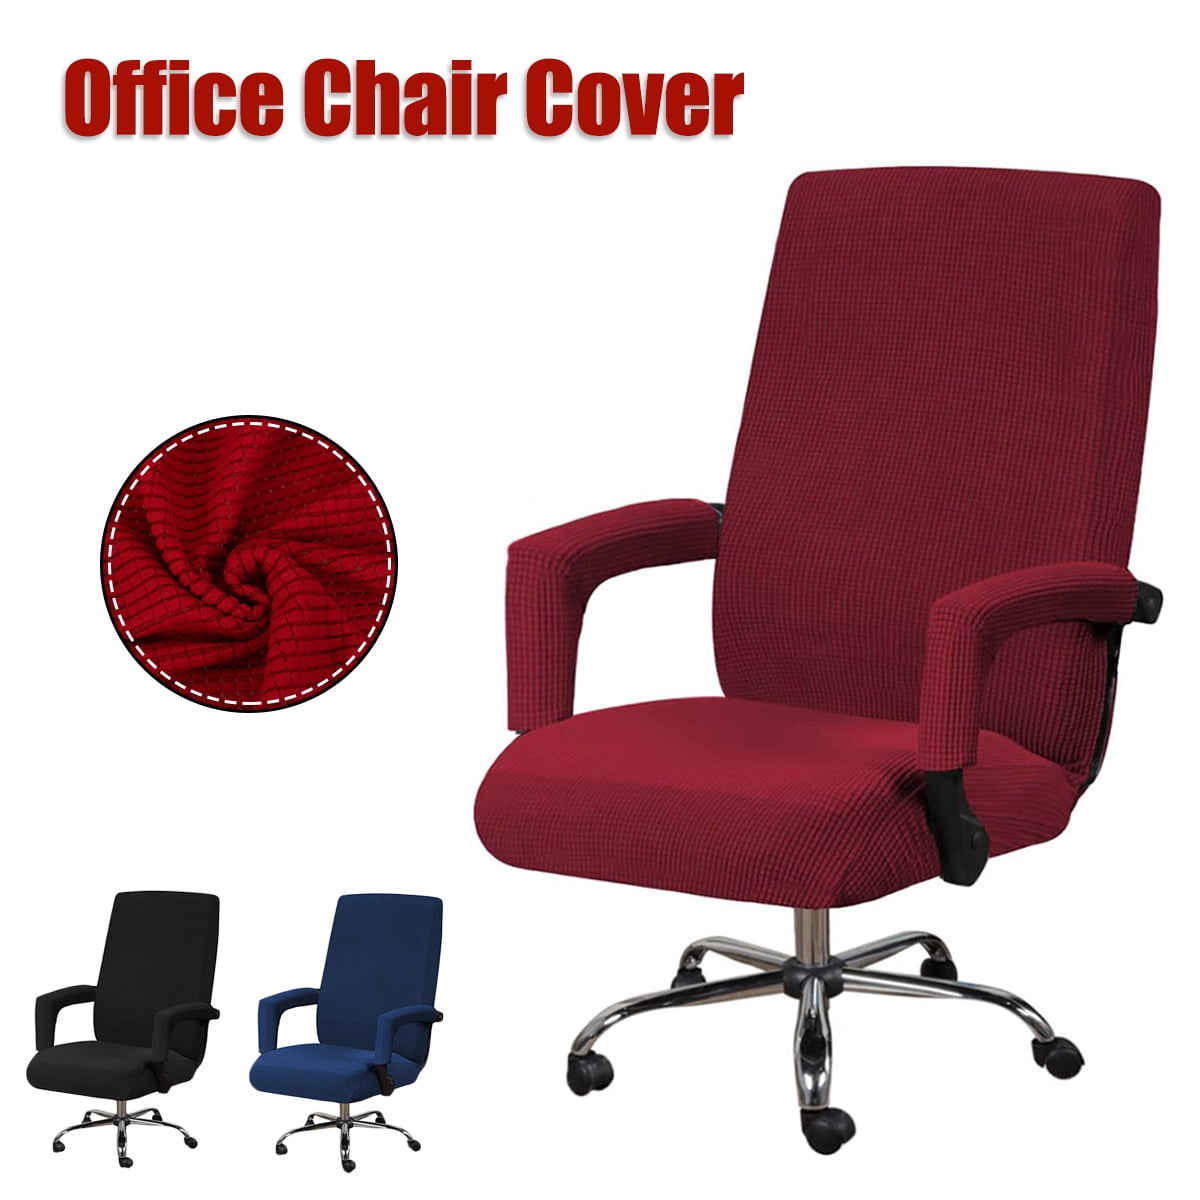 Details about   Elastic Office Chair Armrest Covers Removable Washable Slipcovers Protect Pads 